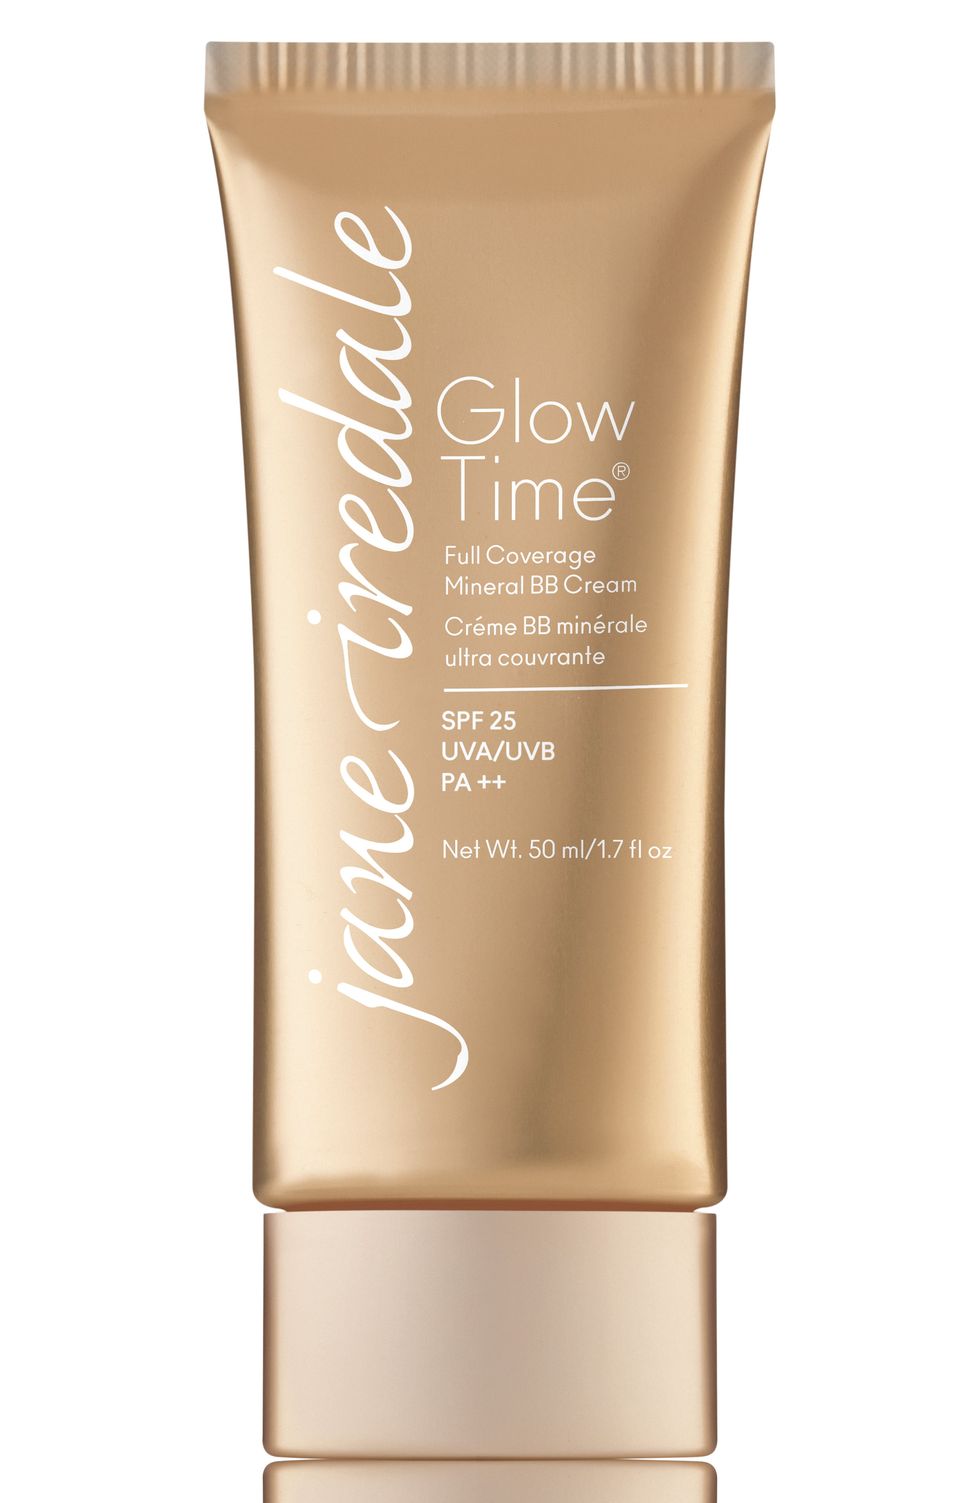 Jane Iredale Glow Time Full Coverage Mineral BB Cream Broad Spectrum SPF 25